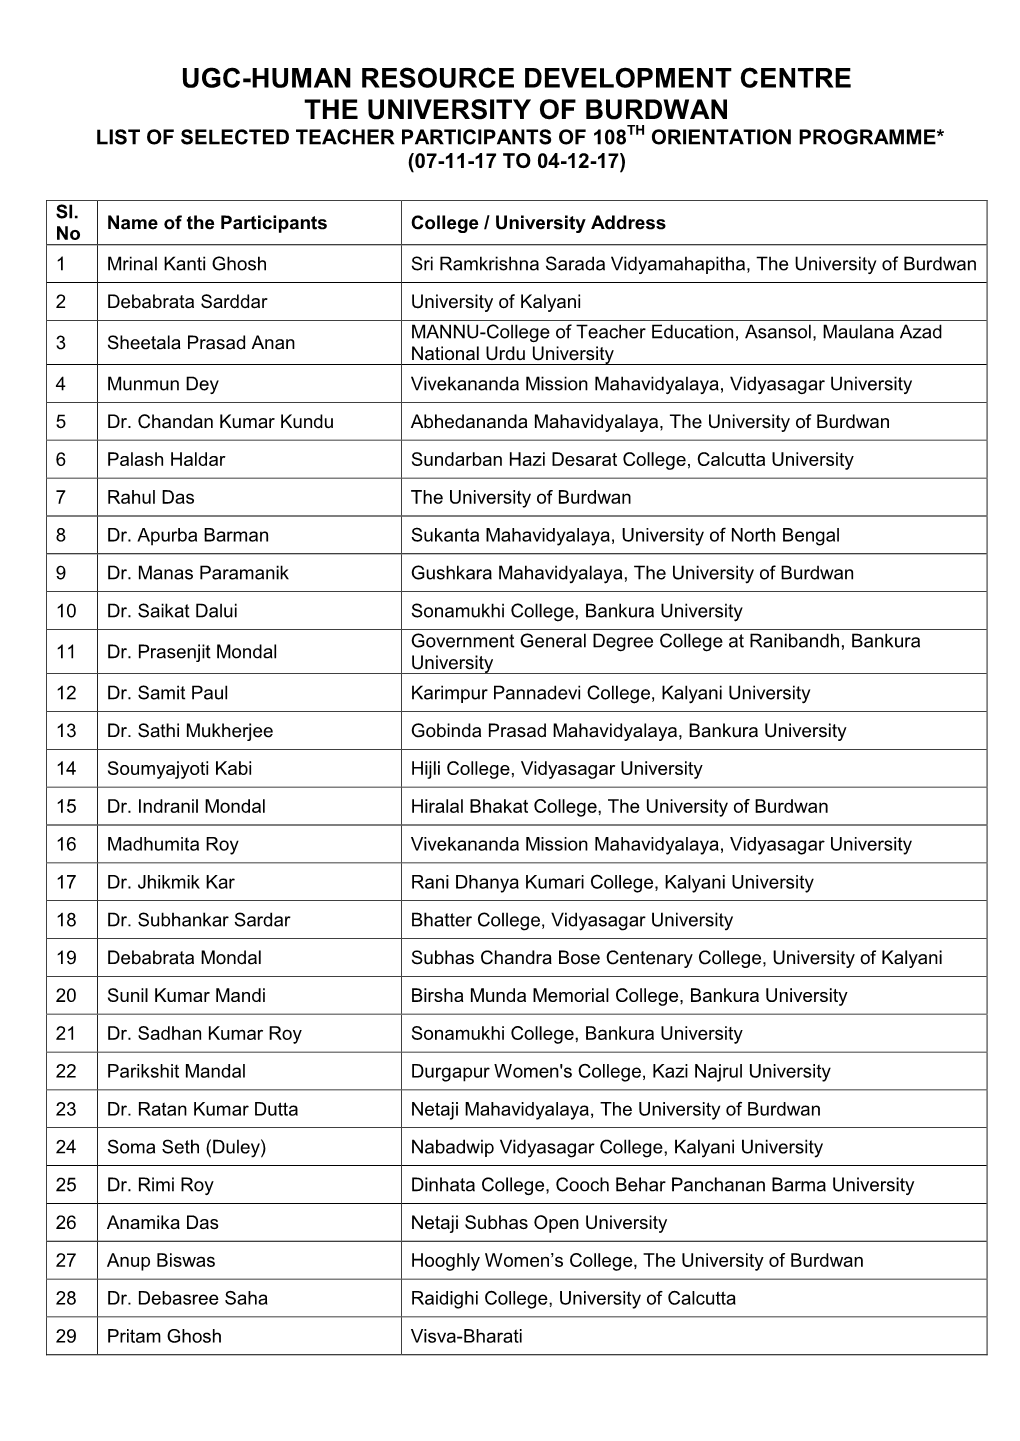 List of Selected Teacher Participants of 108Th Orientation Programme* (07-11-17 to 04-12-17)